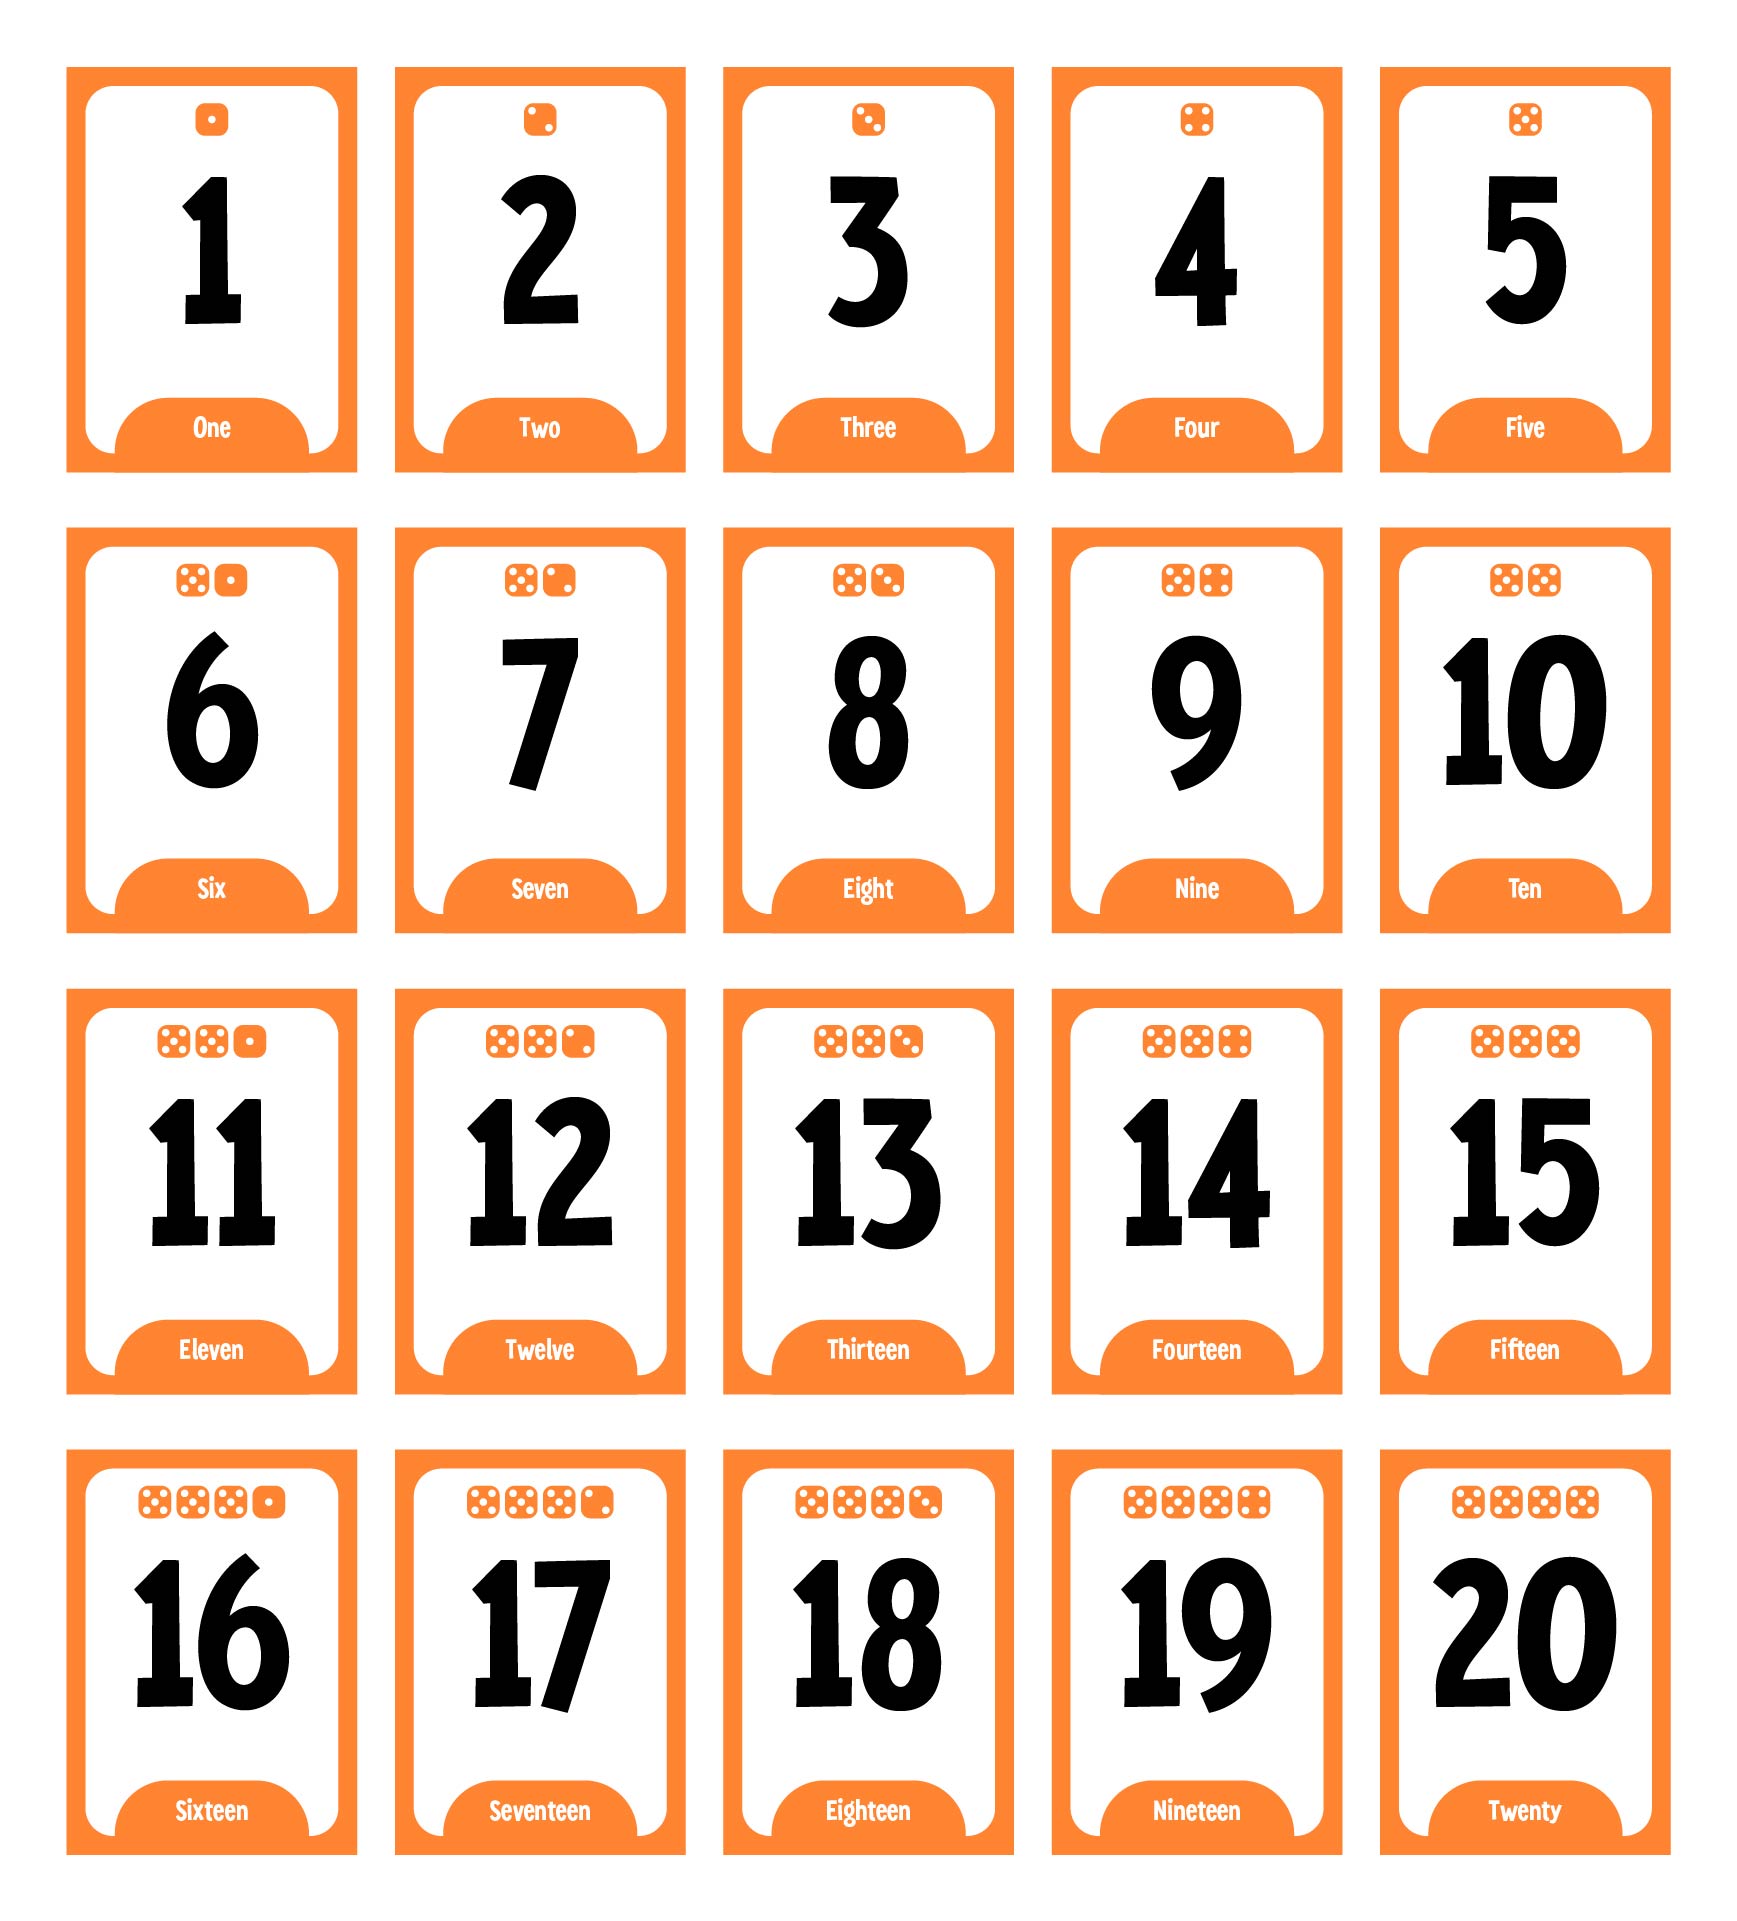 4-best-images-of-large-printable-number-cards-1-20-printable-number-flash-card-1-printable